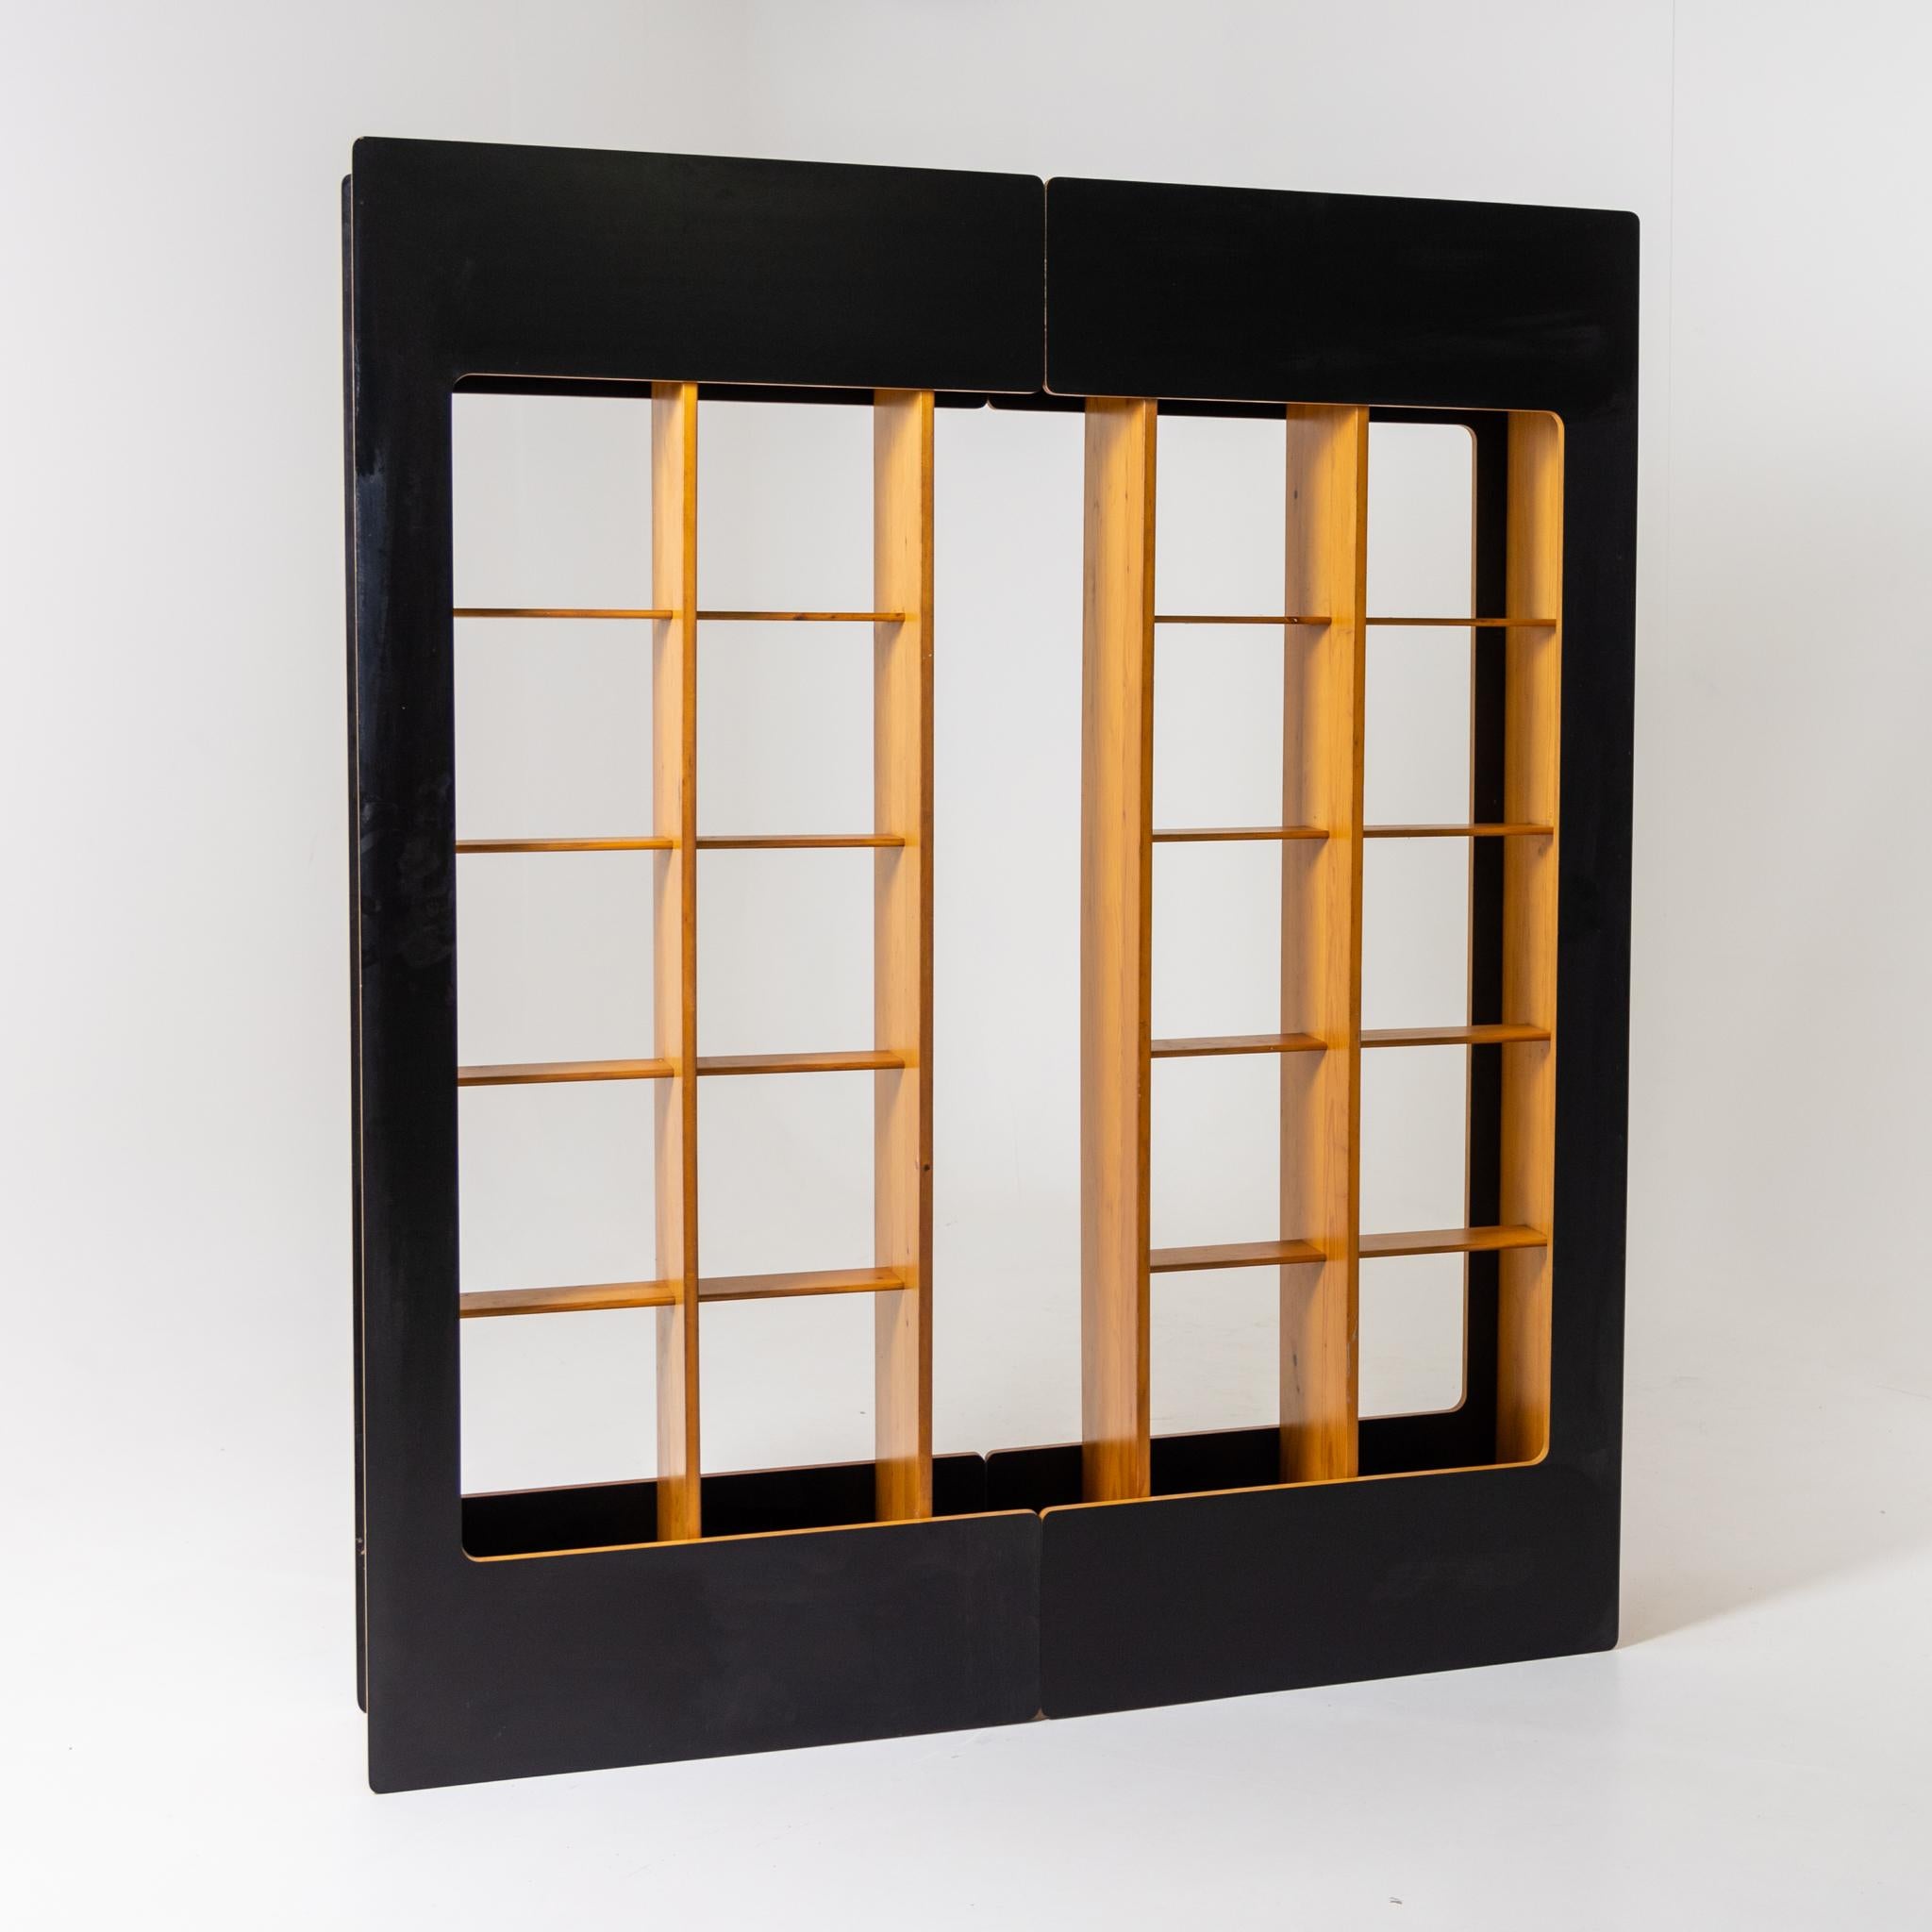 Large shelf with black framing and square compartment division. The two halves can be joined in different ways.